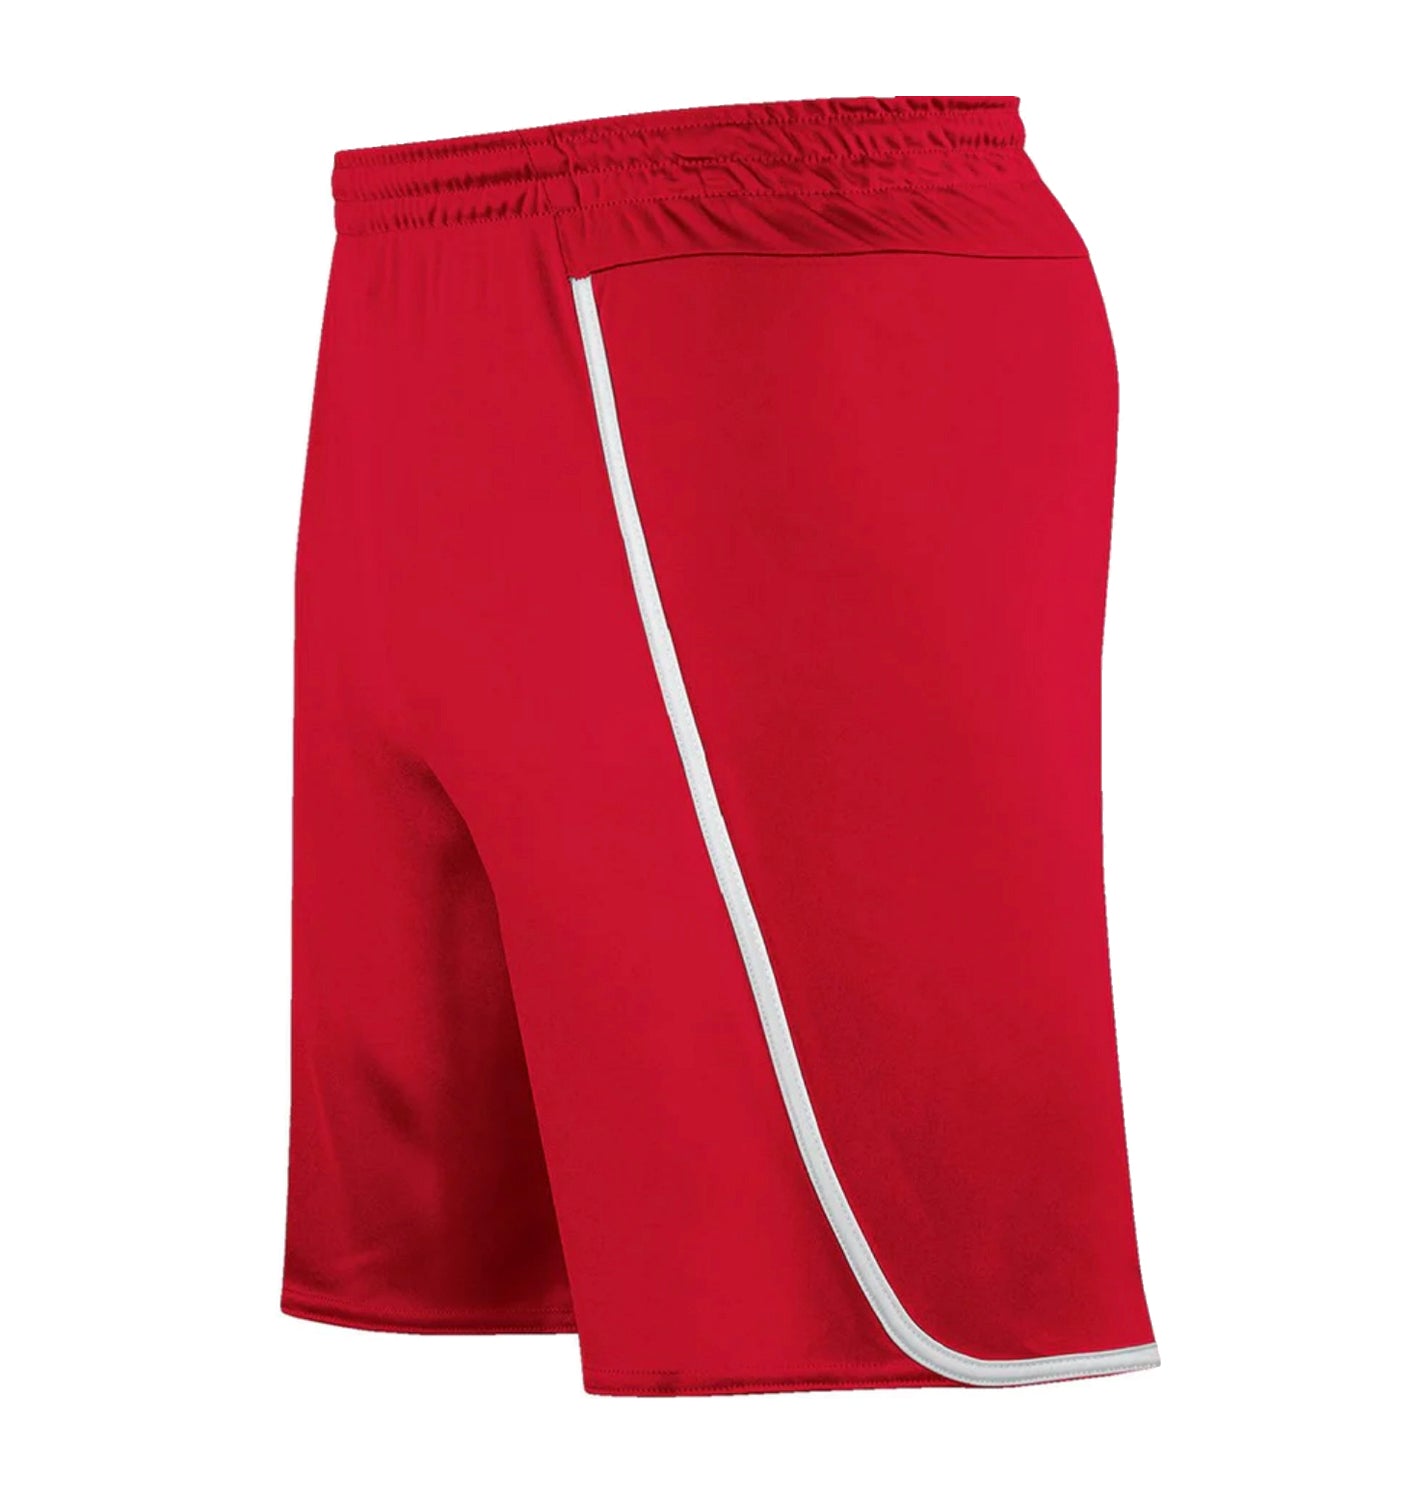 Pacific Soccer Shorts - Youth - Youth Sports Products